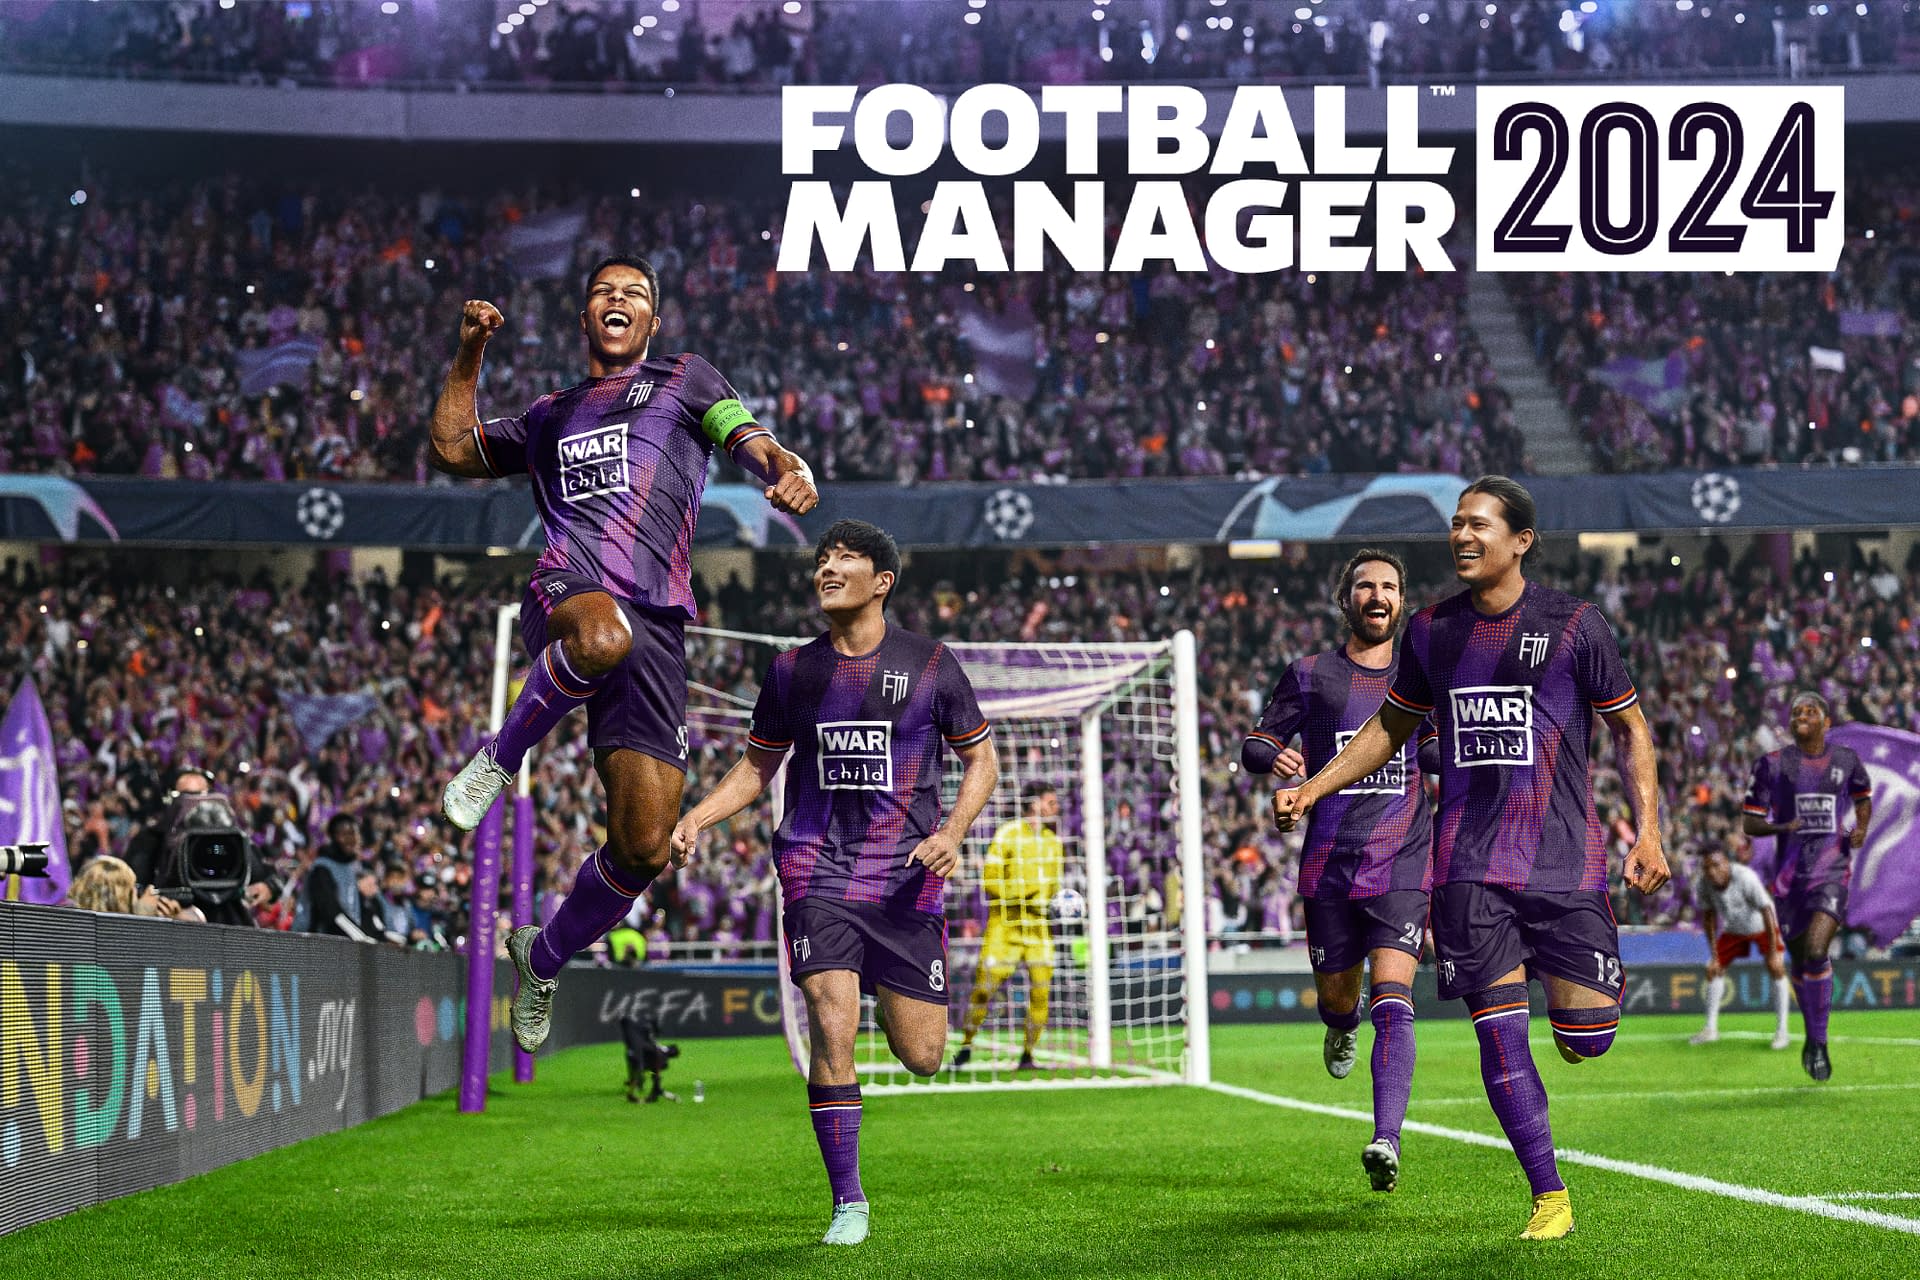 Football Manager 2023 Touch Launches For Switch On November 8